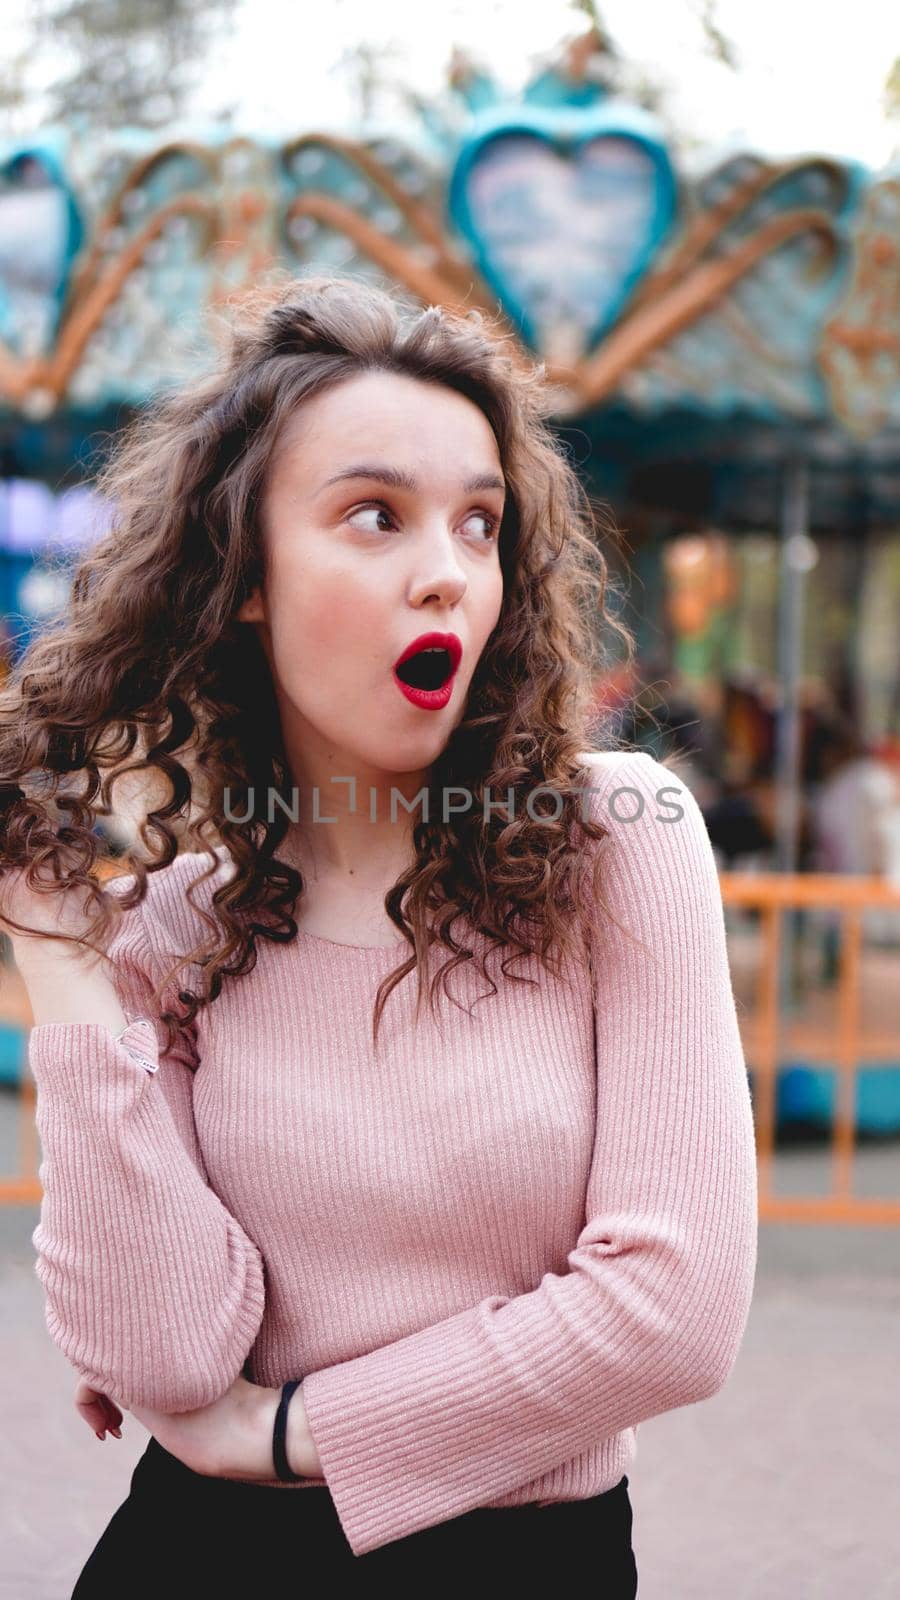 Girl chilling in amusement park in weekend morning. Laughing good-humoured female model with curly hair standing near carousel.